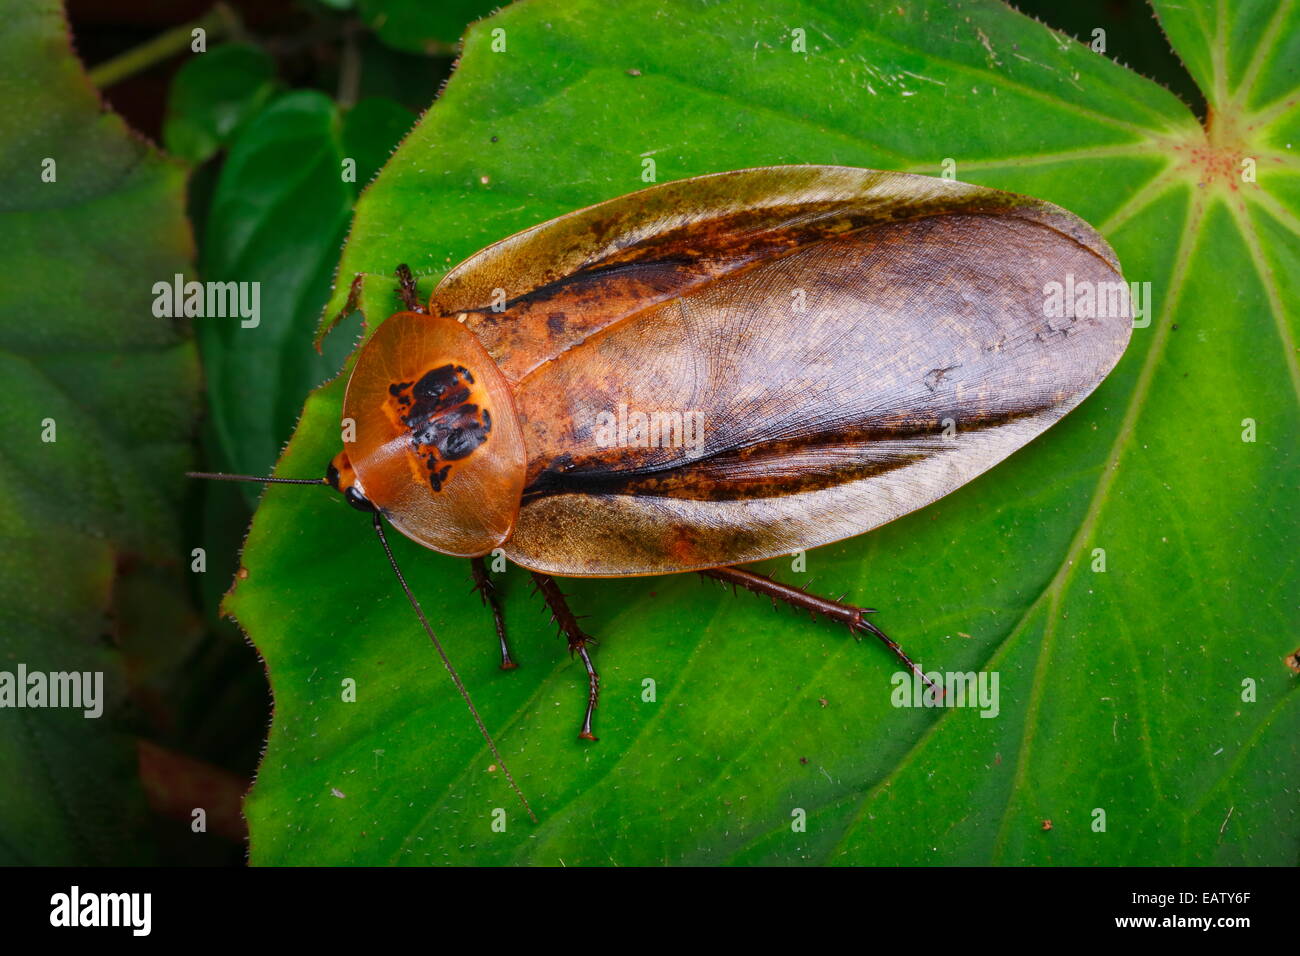 A giant cockroach, Archimandrita tessellata, foraging on a leaf in the rain forest. Stock Photo